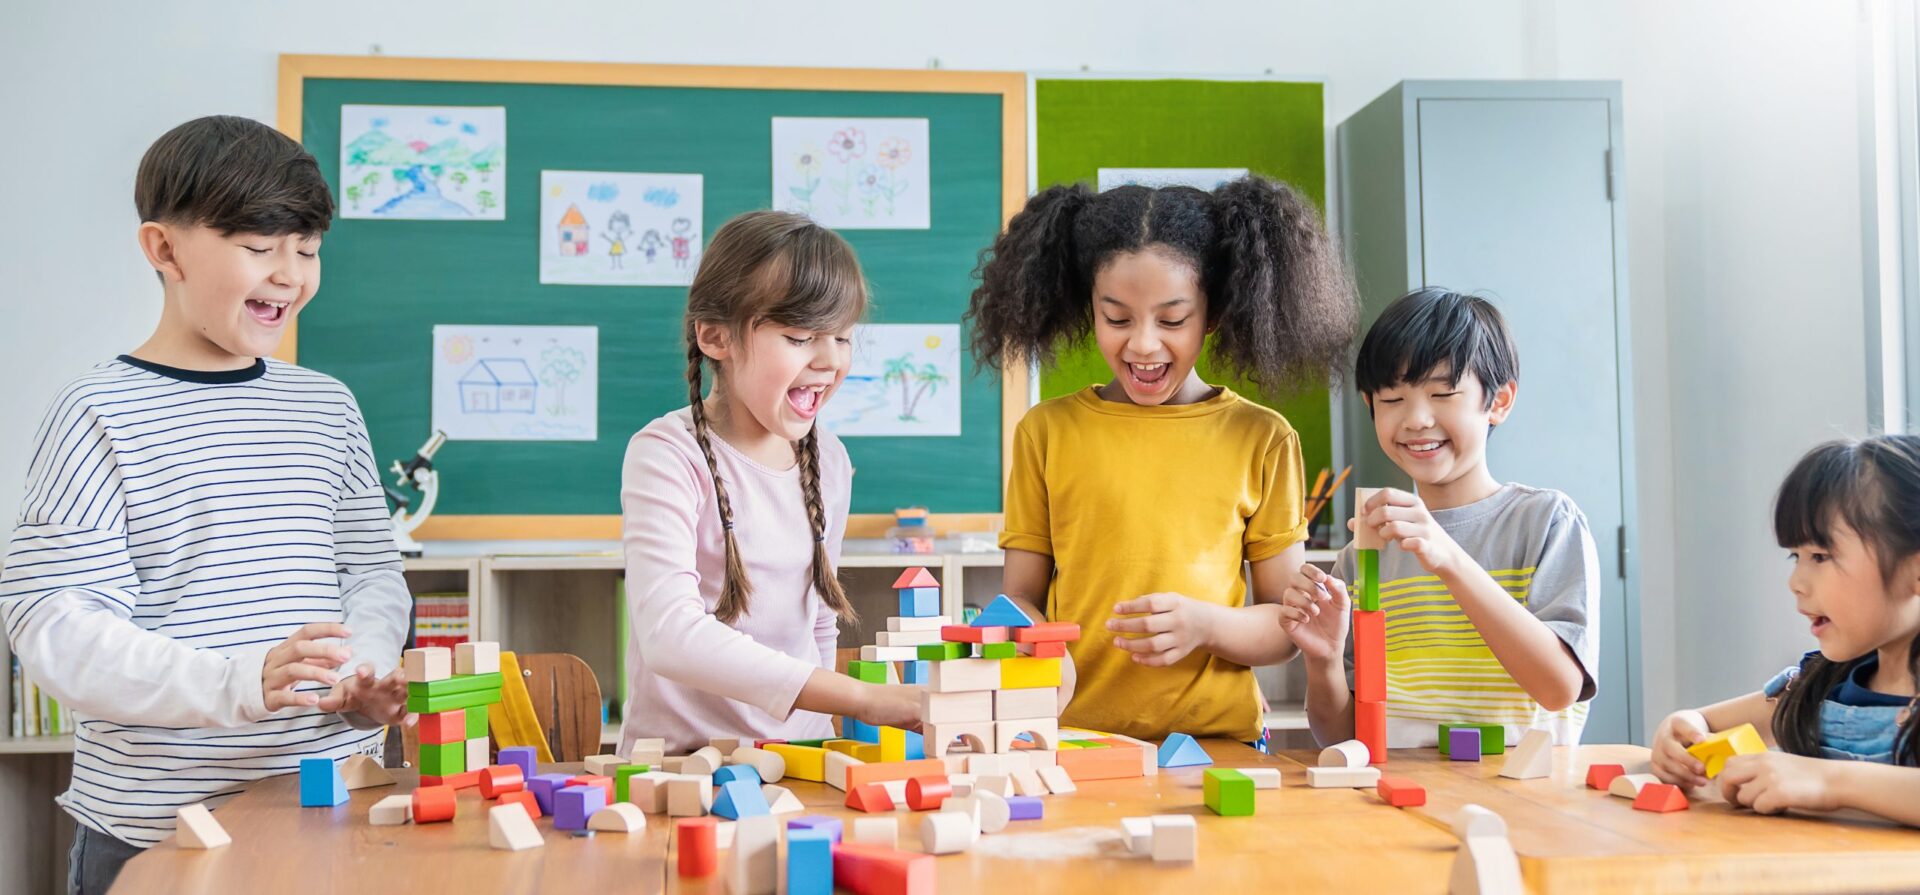 Portrait of asian caucasian little children playing colorful blocks in classroom. Learning by playing education group study concept. International pupils doing activities brain training in primary school.